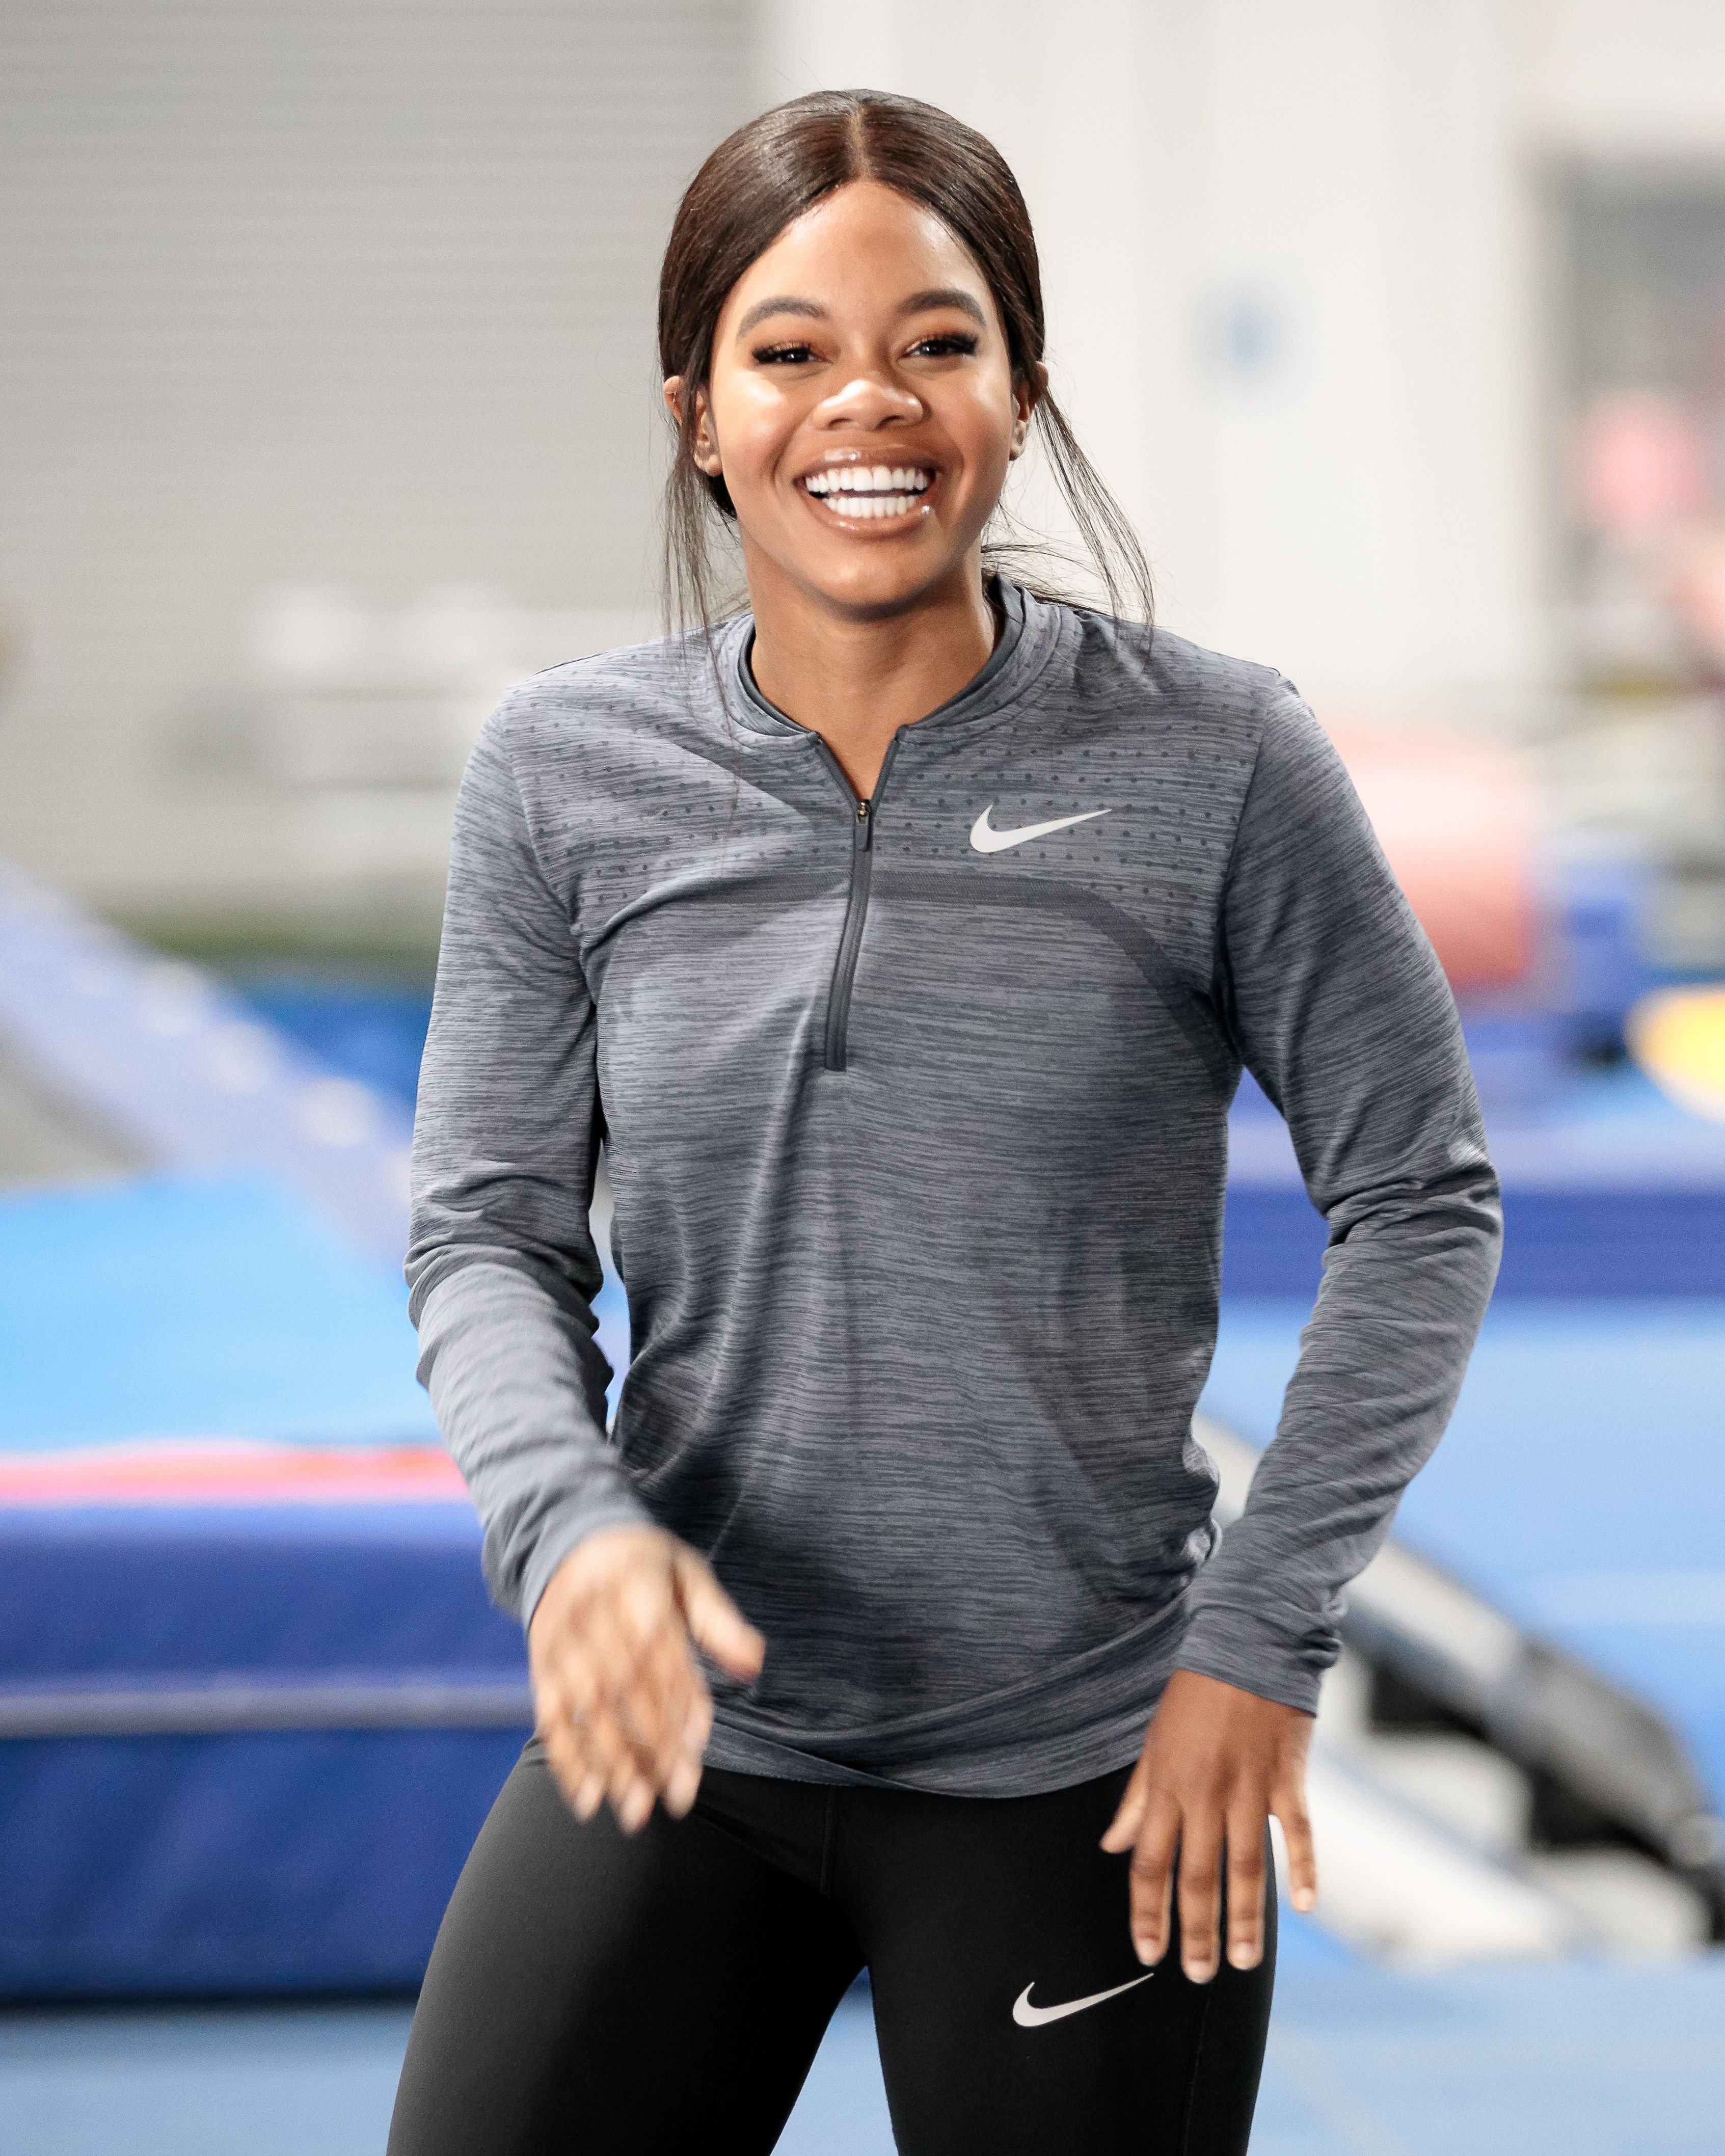 Gabby Douglas during the IMDb Series “Special Skills” in Los Angeles, California. This episode of “Special Skills” airs on March 10, 2020. | Source: Getty Images